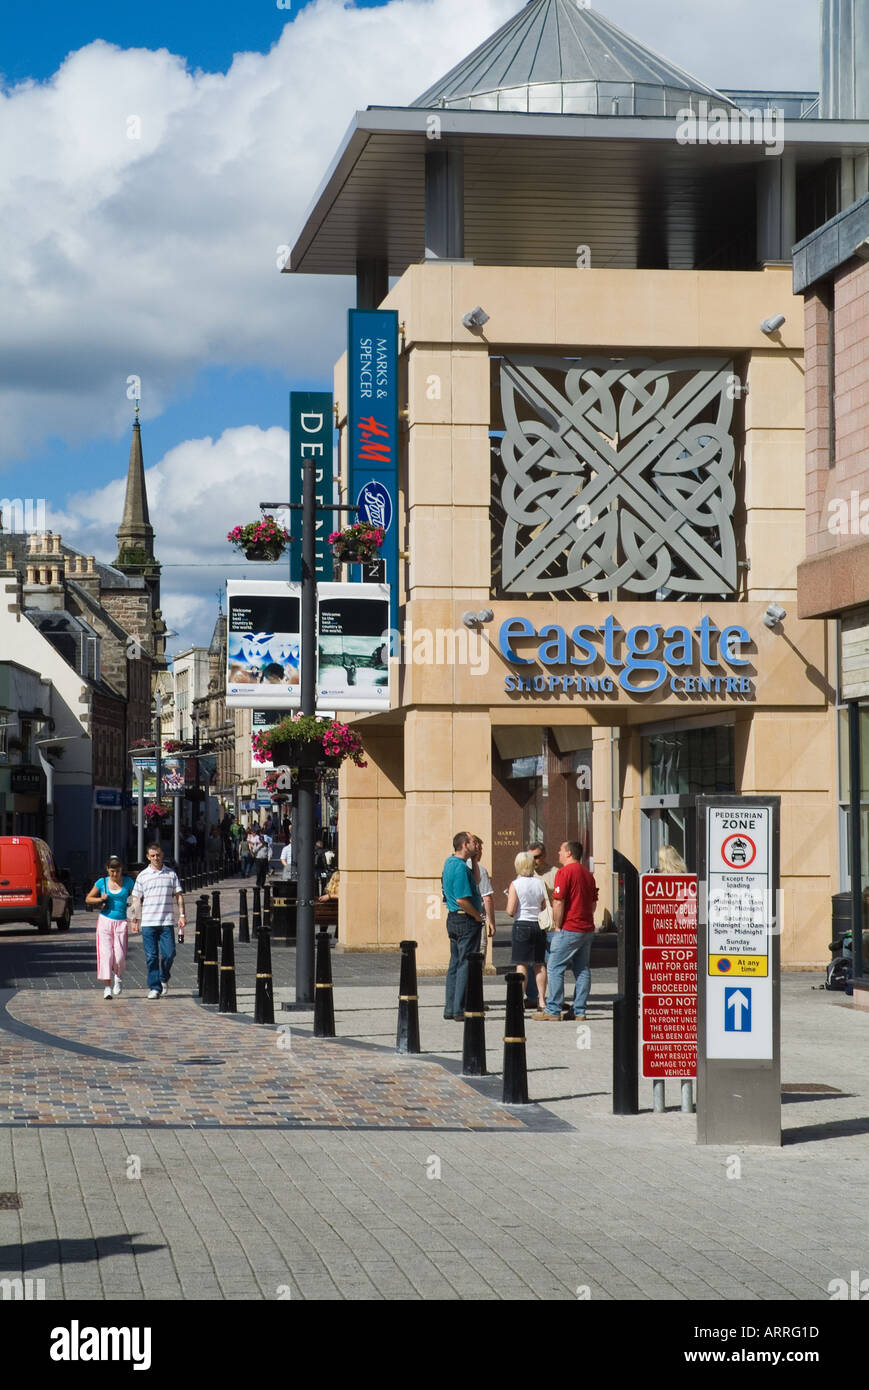 dh Eastgate INVERNESS INVERNESSSHIRE People in High Steet entrance to Eastgate shopping centre mall street Stock Photo